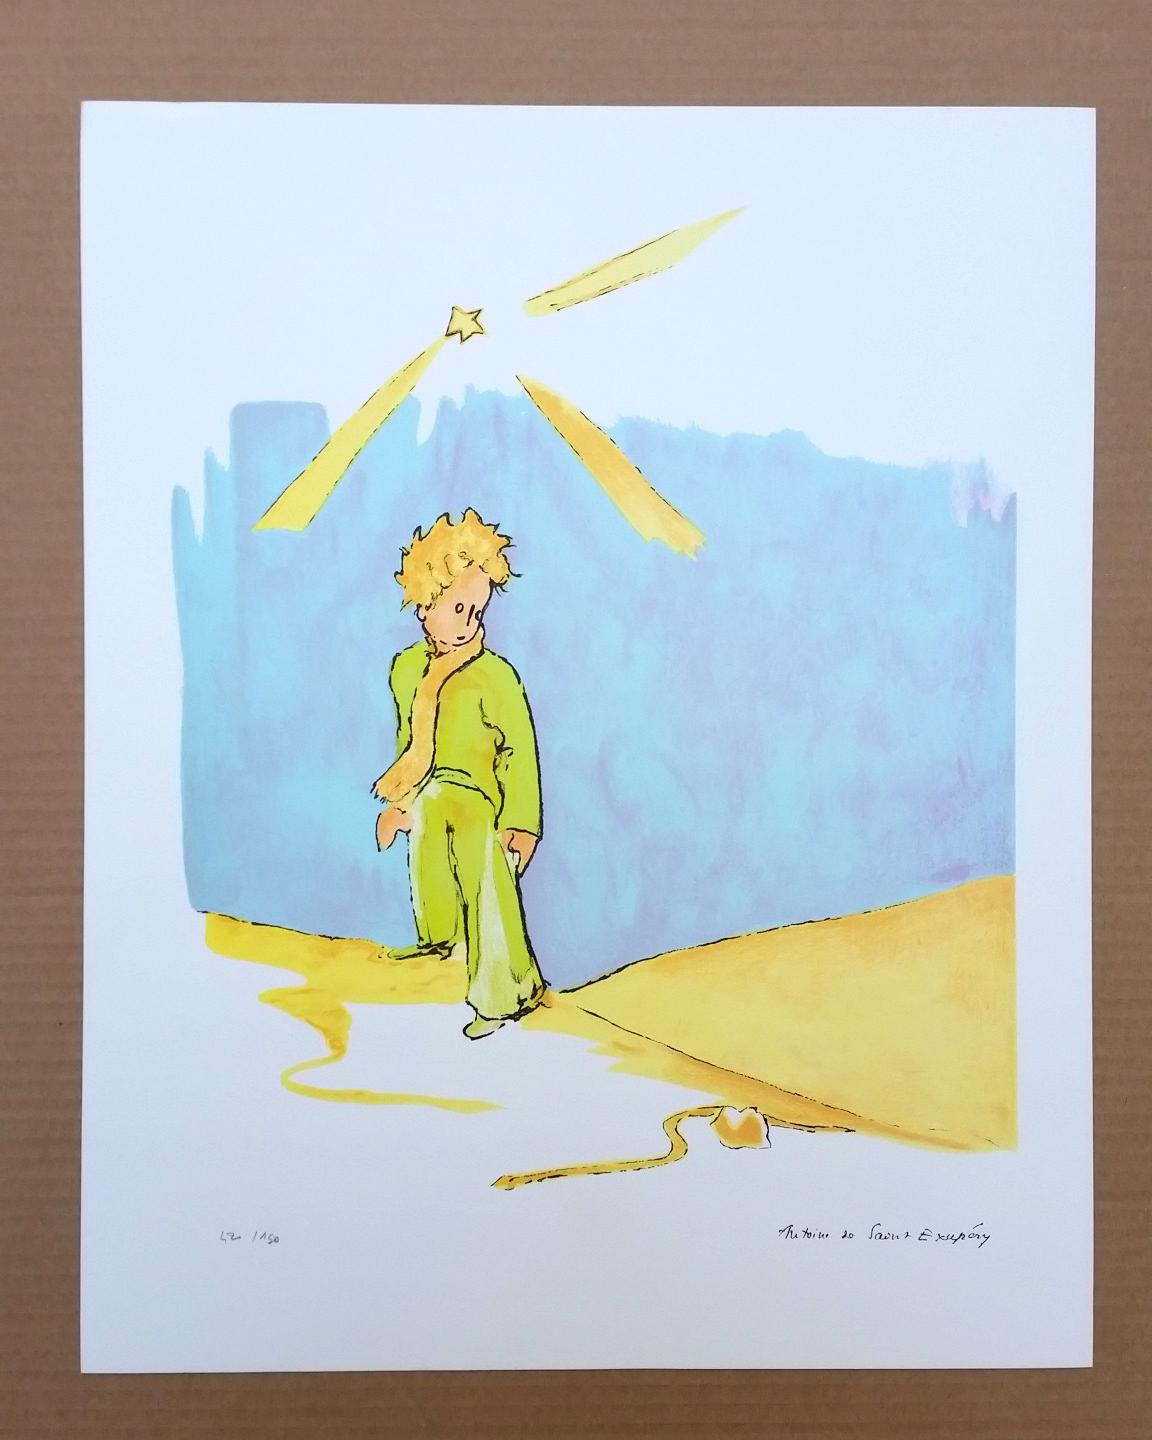 The Little Prince and the snake L - Print by Antoine de saint Exupery